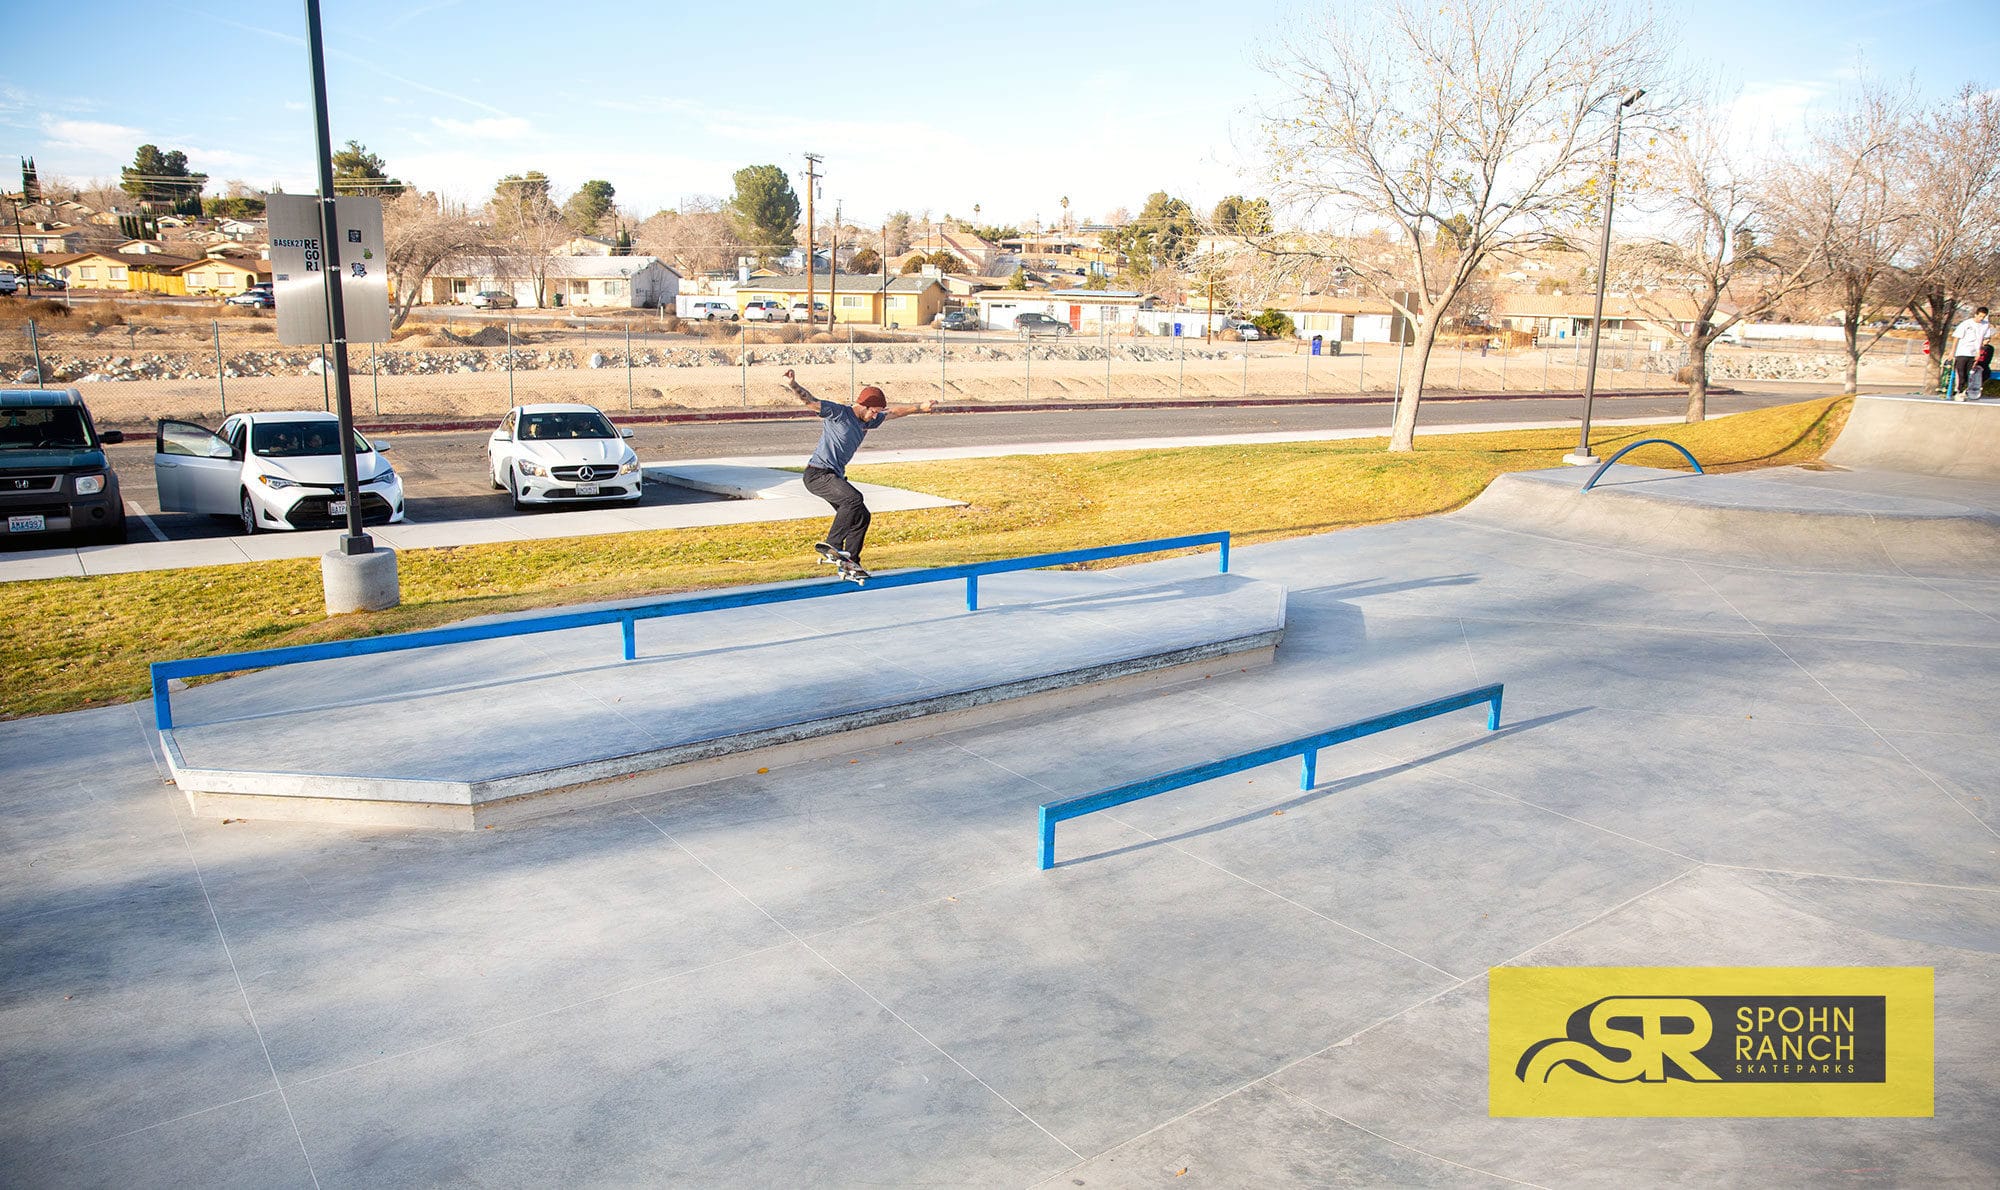 Zach Doelling nose grinding his way across the long square flatbar at Victorville Skatepark